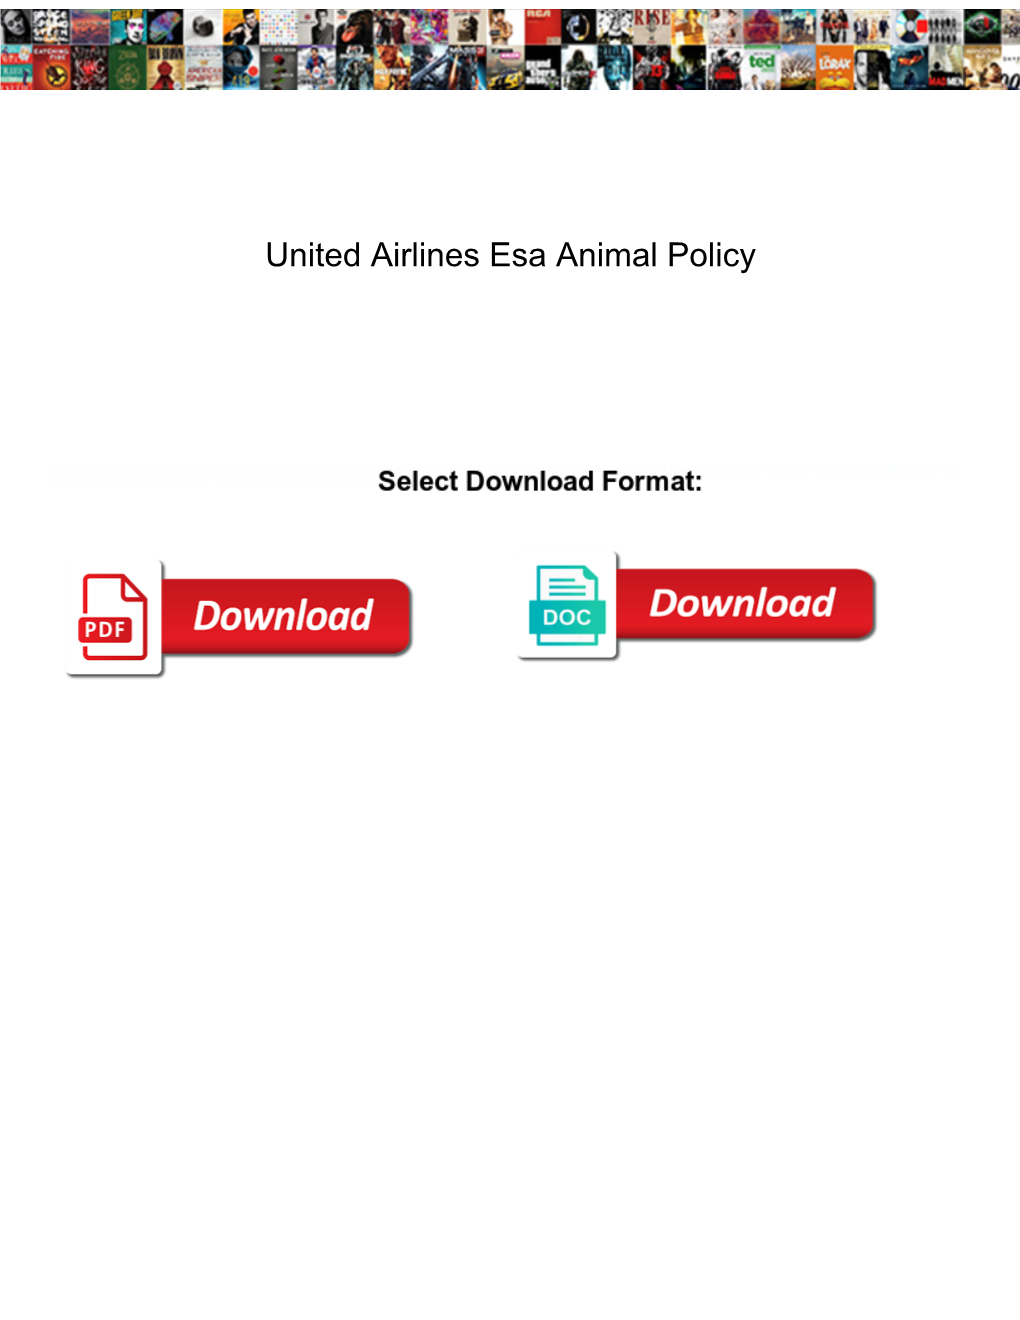 United Airlines Esa Animal Policy